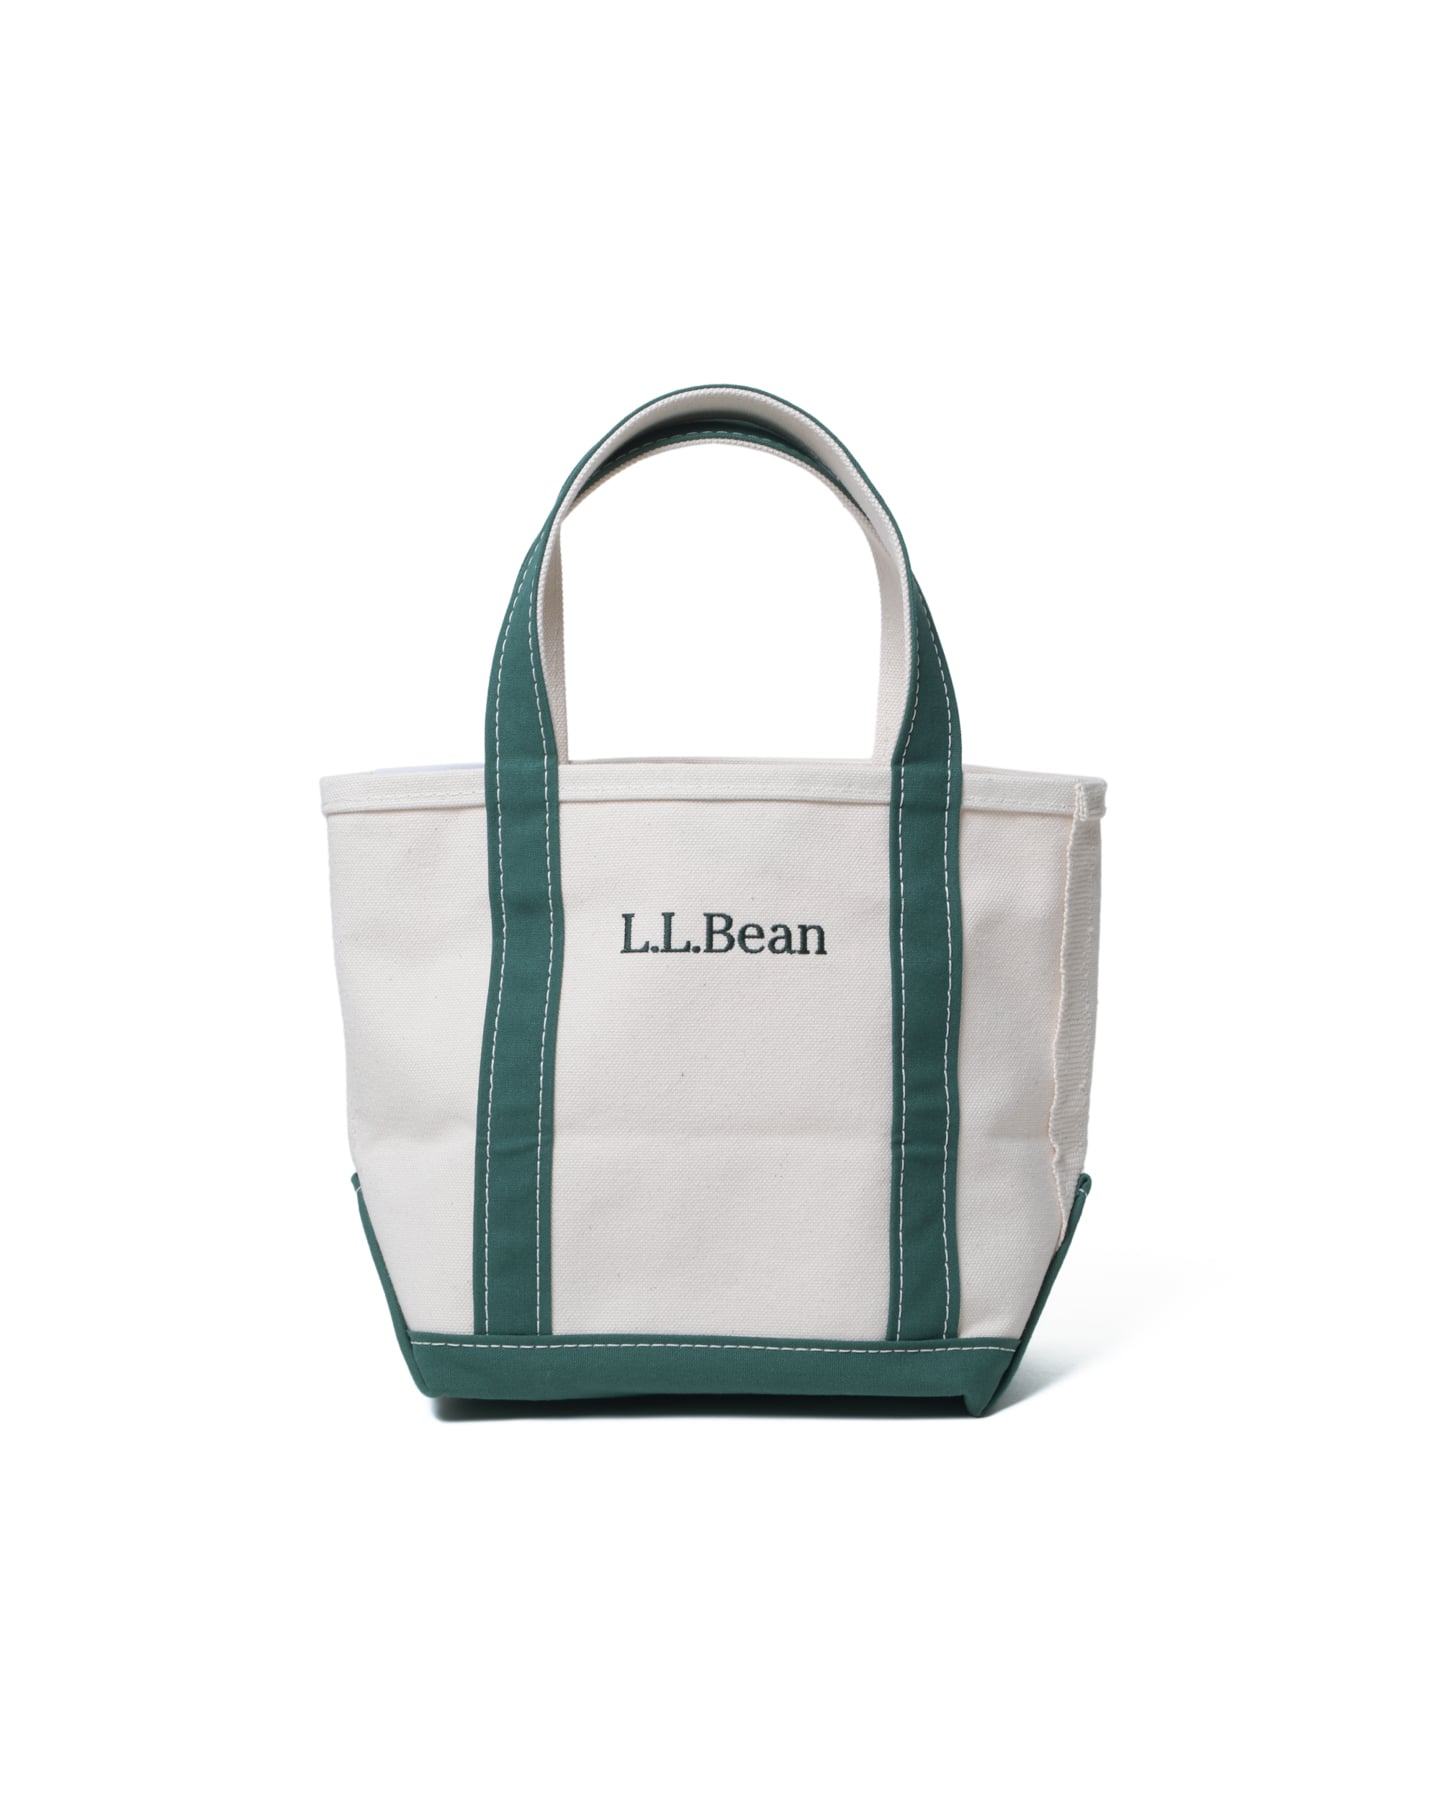 SOPH. | L.L.Bean BOAT AND TOTE, OPEN-TOP : SMALL(FREE 